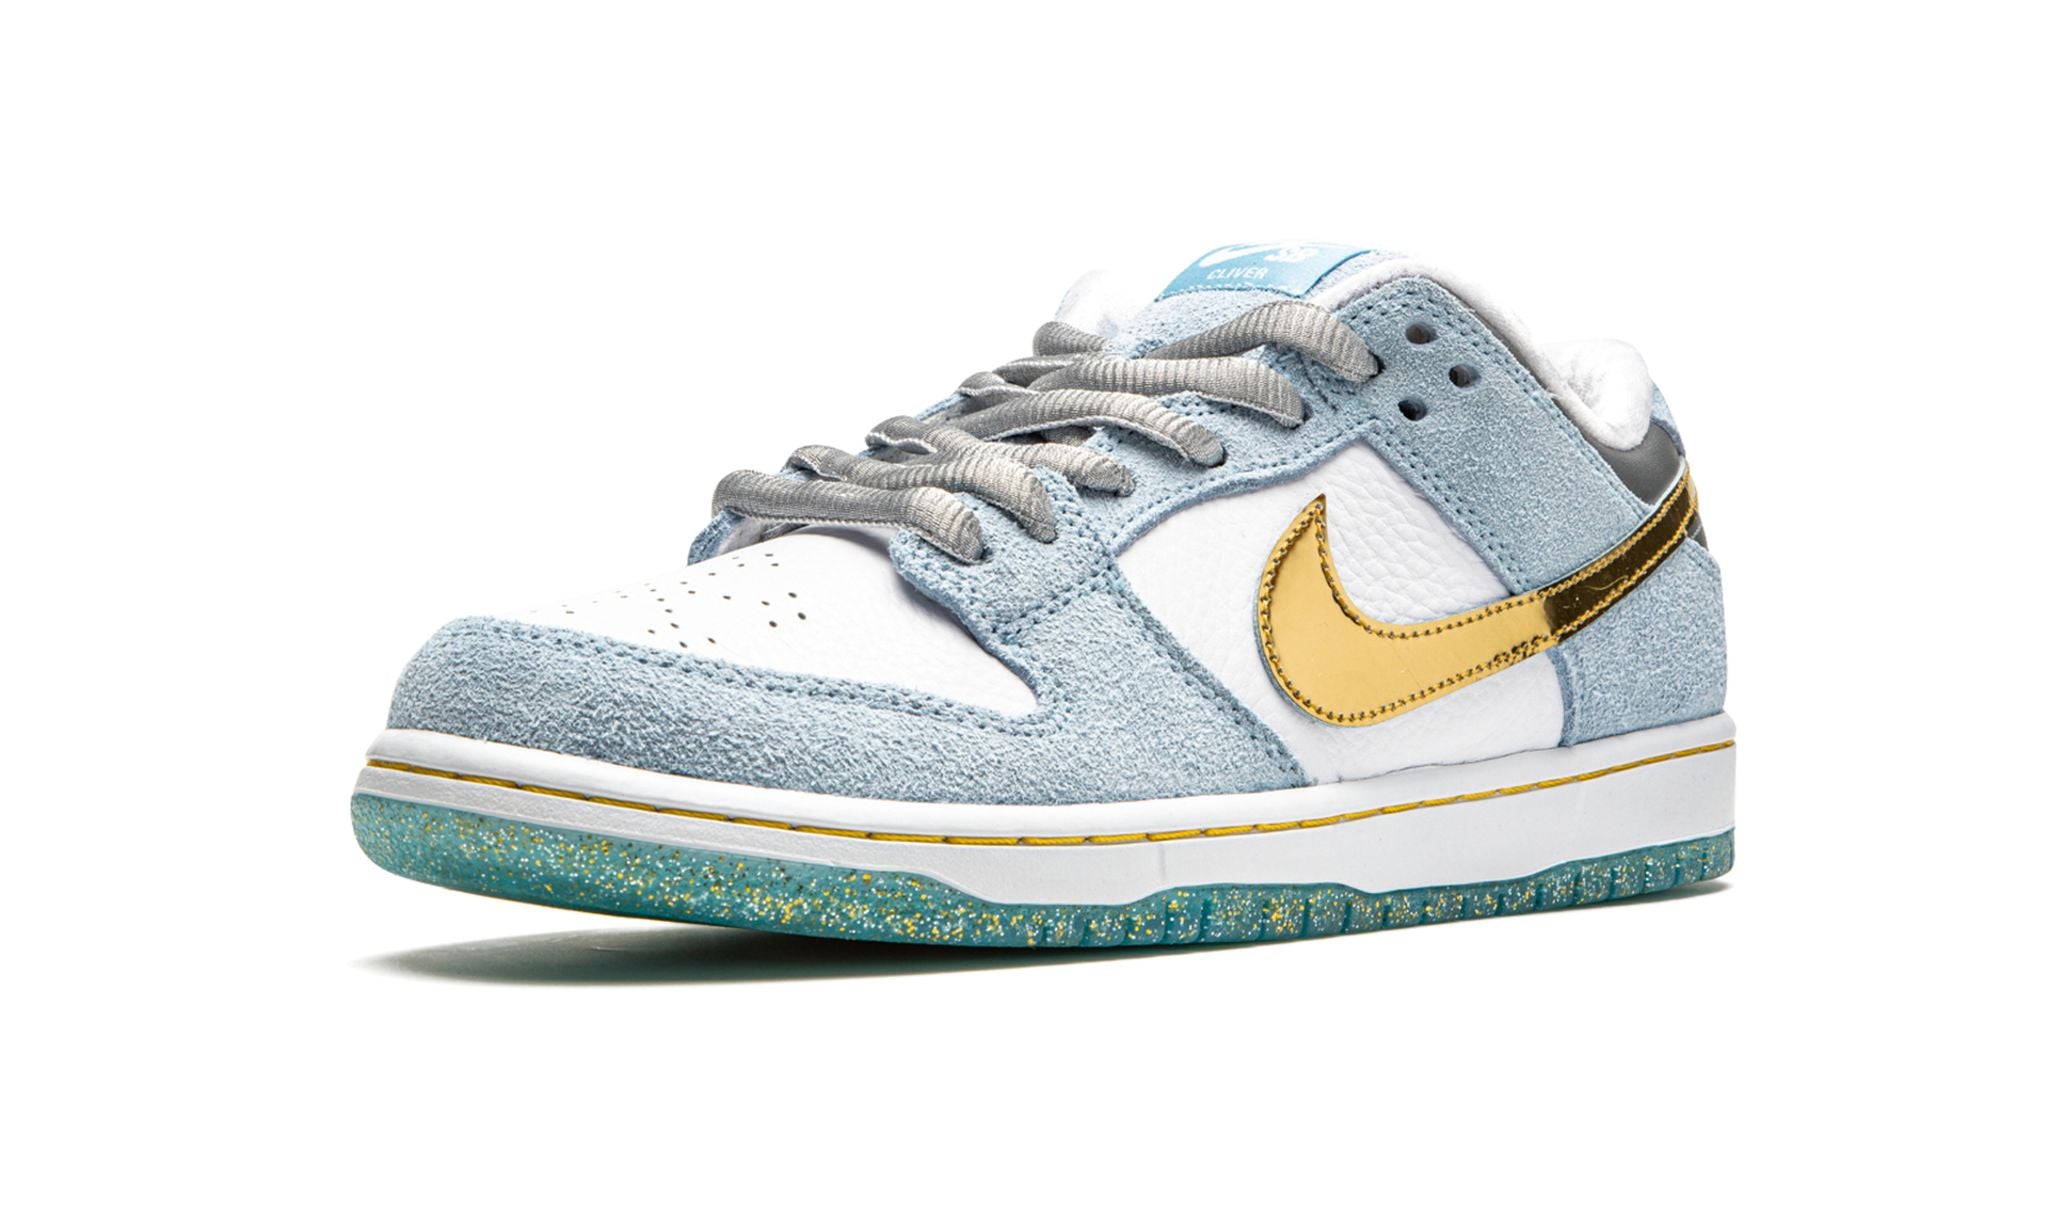 SB DUNK LOW "Sean Cliver - Holiday Special"